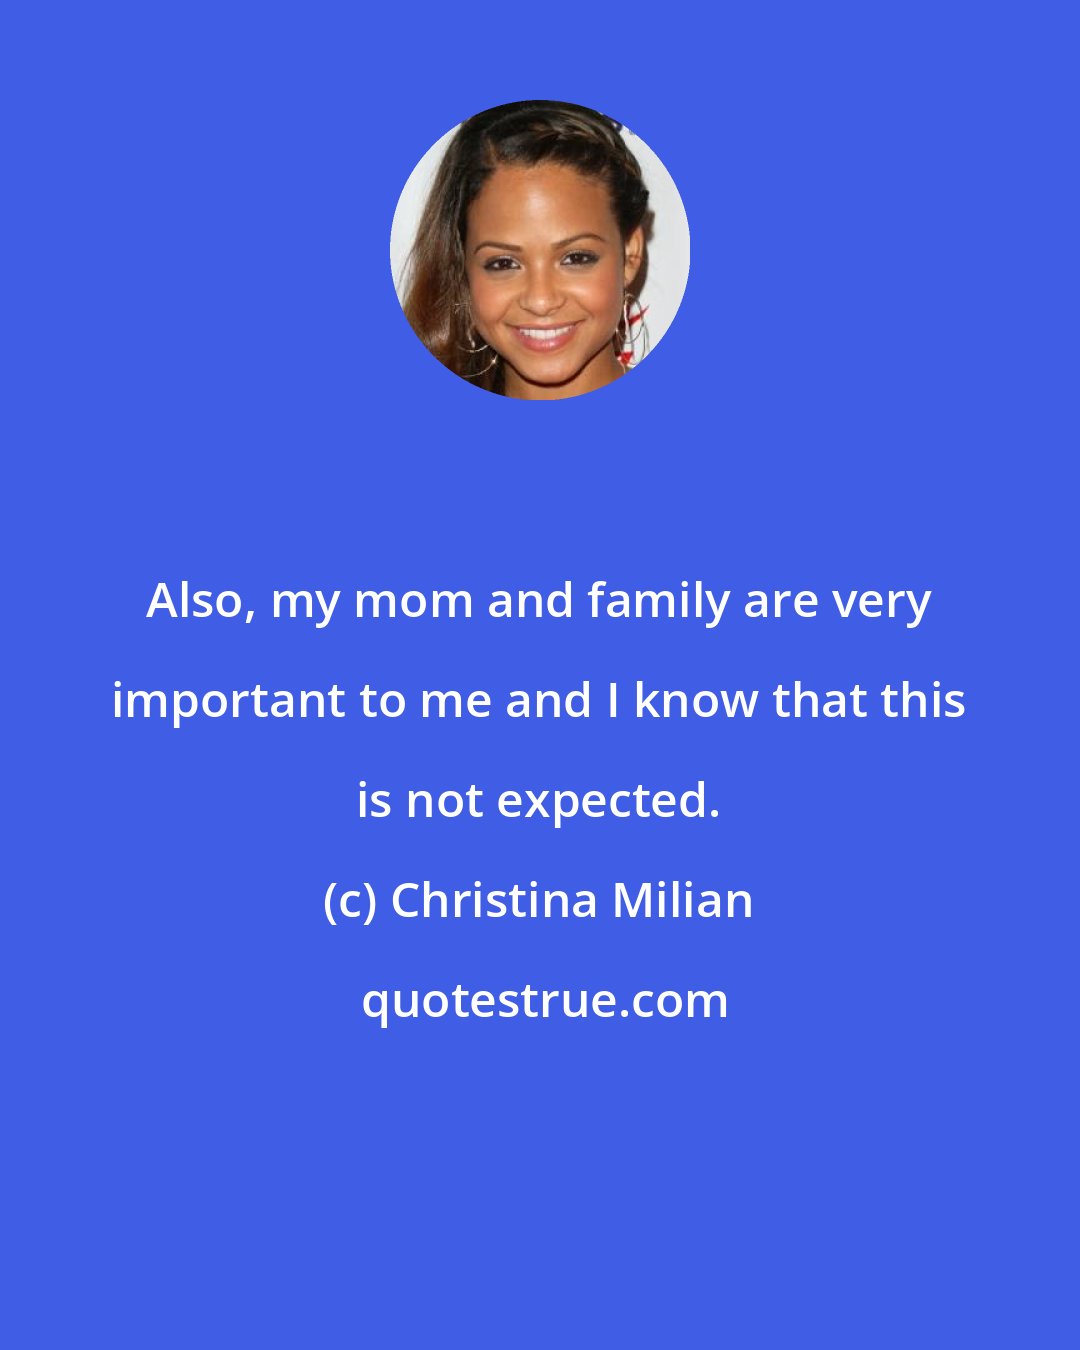 Christina Milian: Also, my mom and family are very important to me and I know that this is not expected.